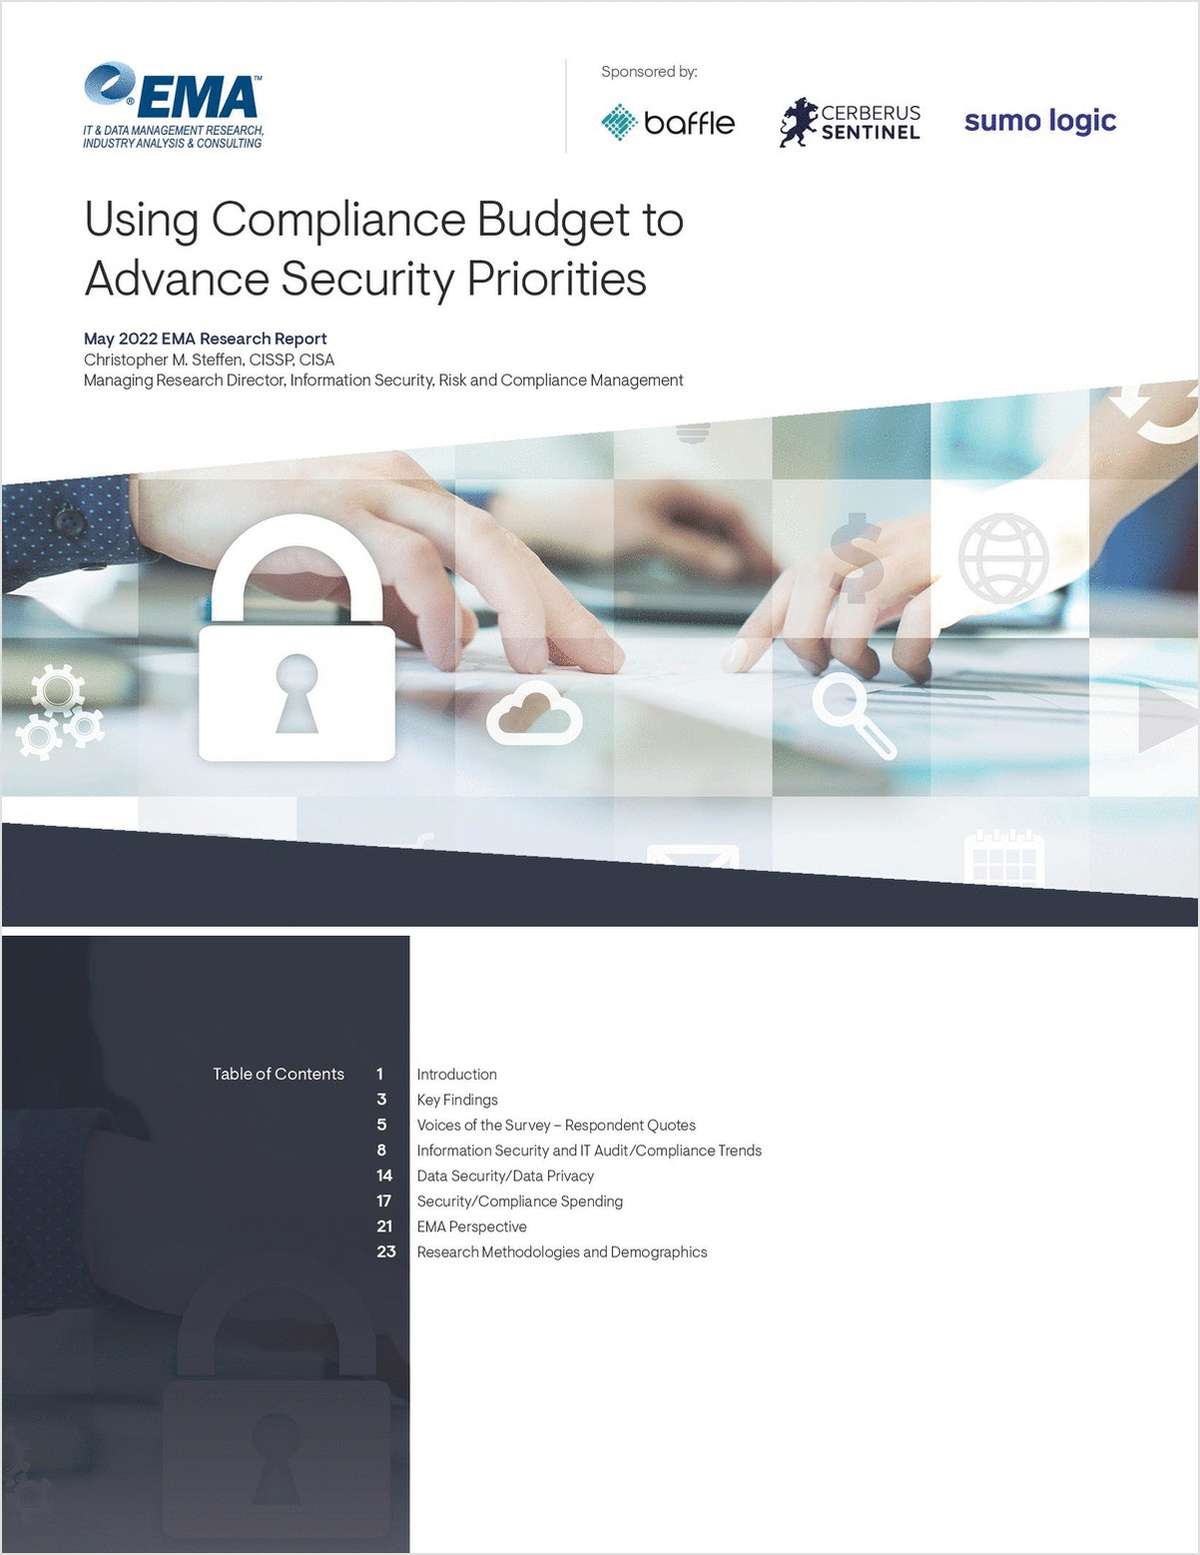 Using Compliance Budget to Advance Security Priorities